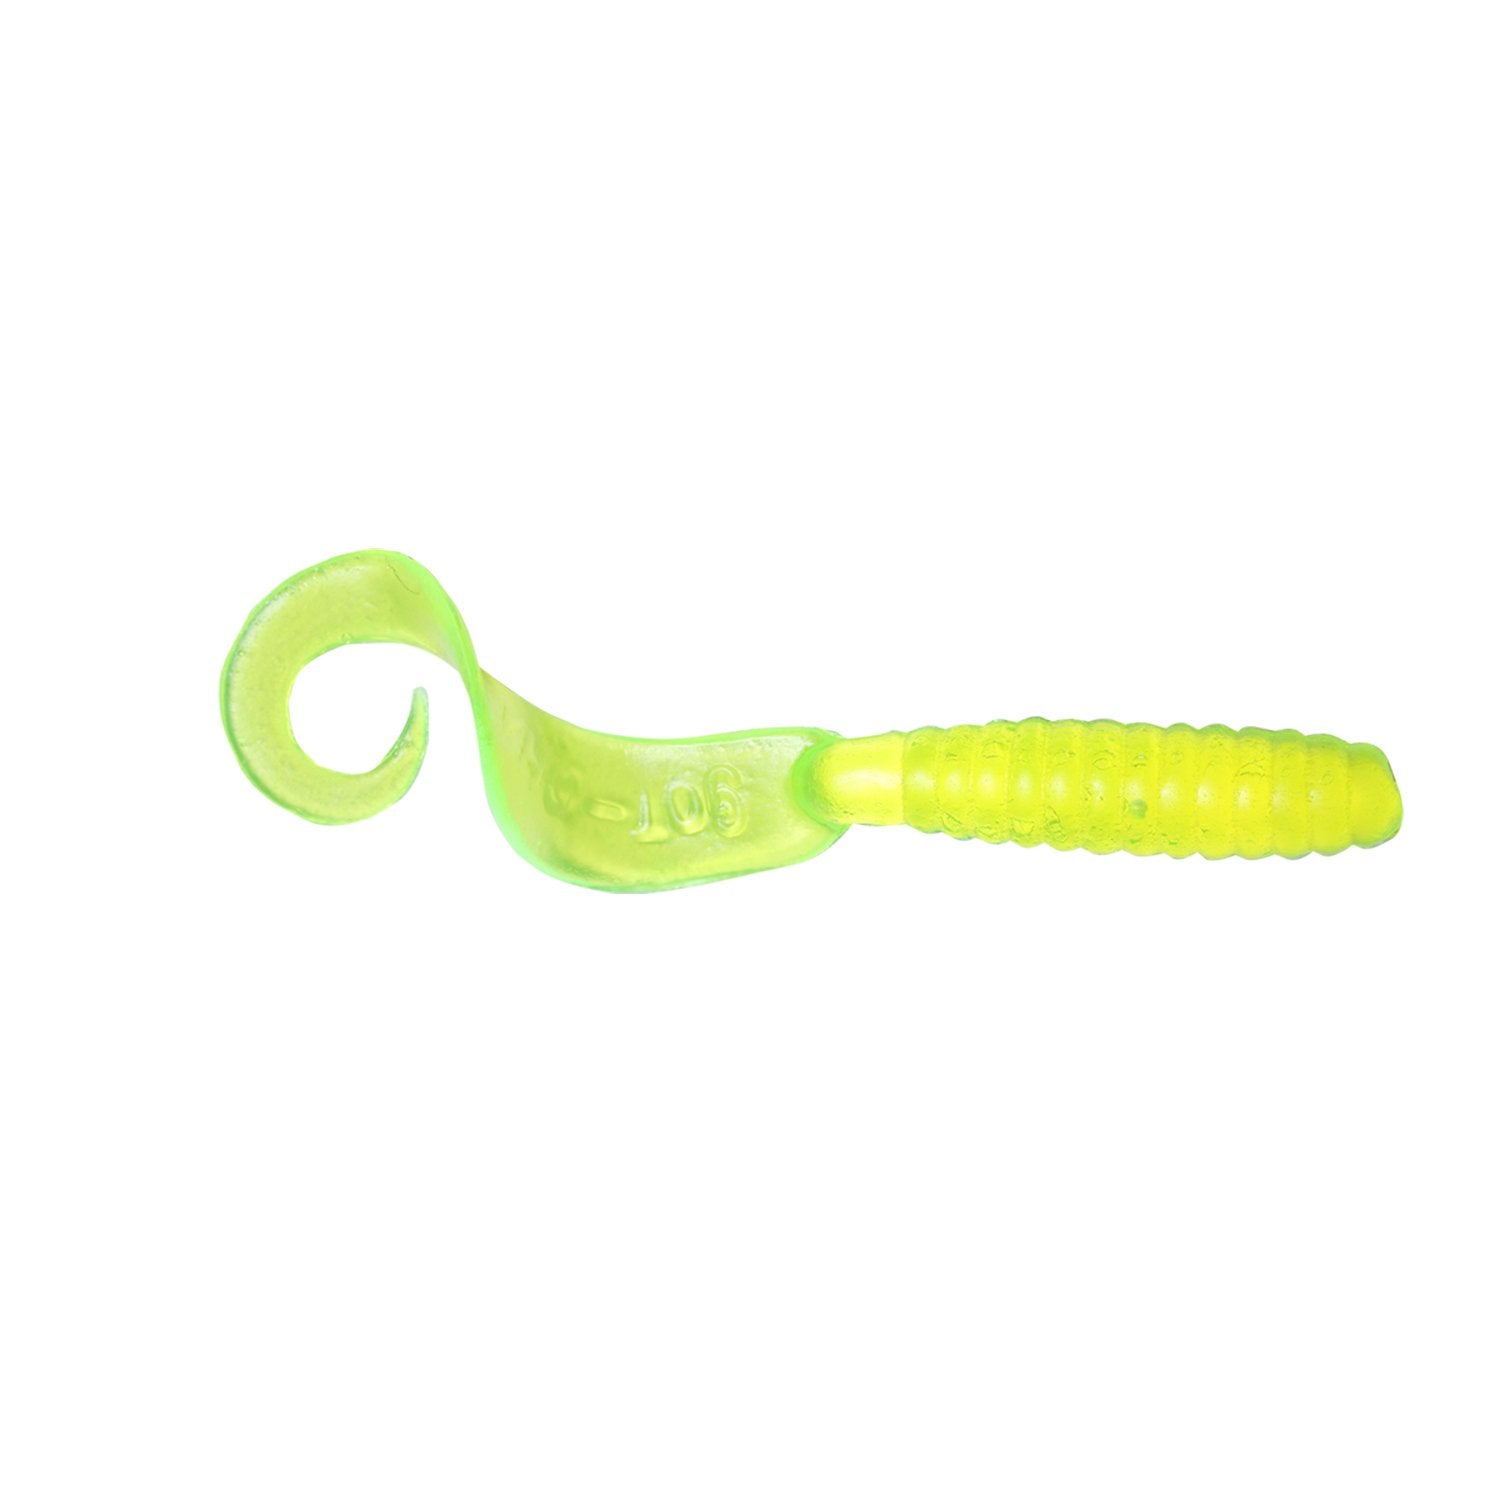 5 Curly-Tail Grub (10 Pack) - Root Beer Green